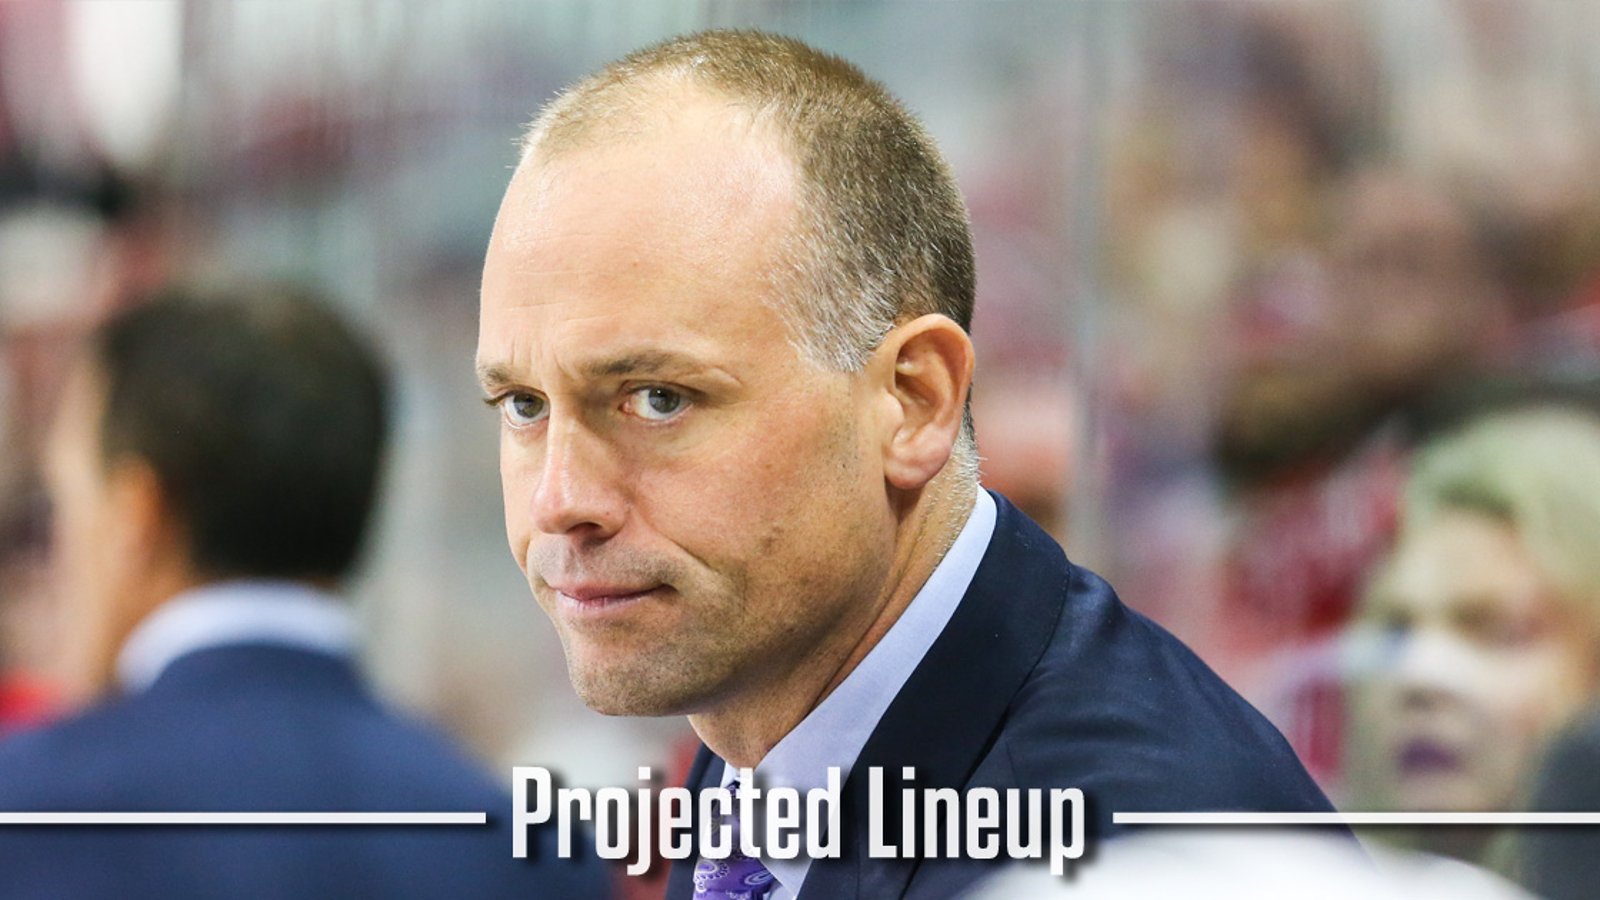 Projected lineup: Forward expected to be in the lineup tonight against Toronto.